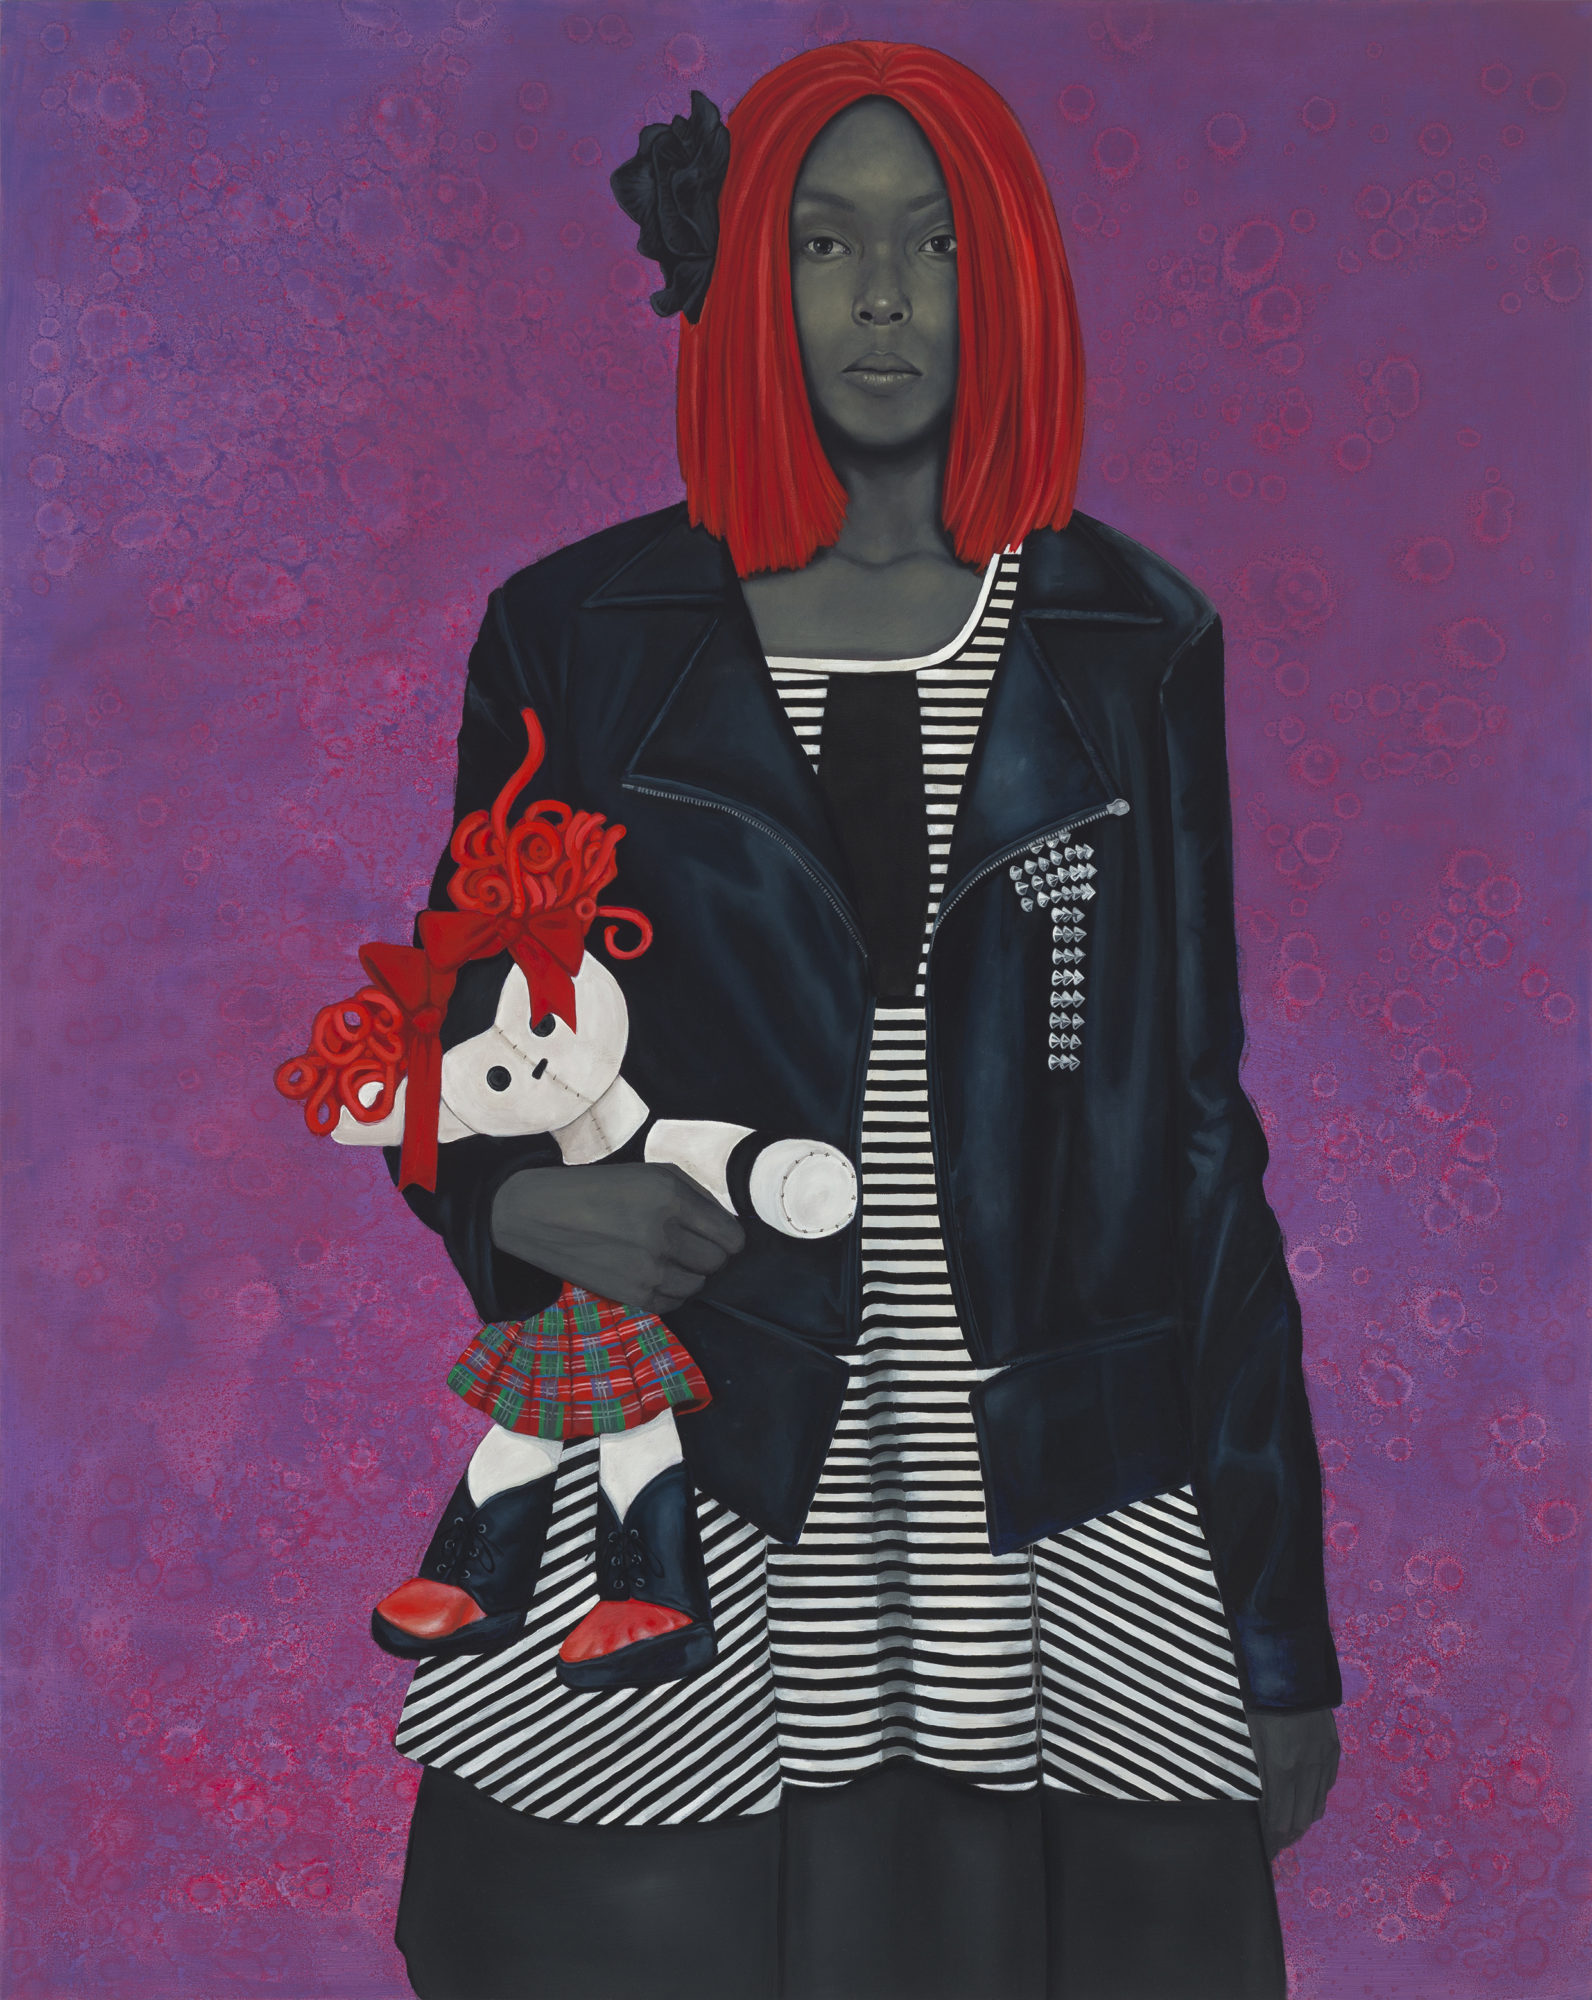 A woman with red hair holding a rag doll in front of a textured, colored background